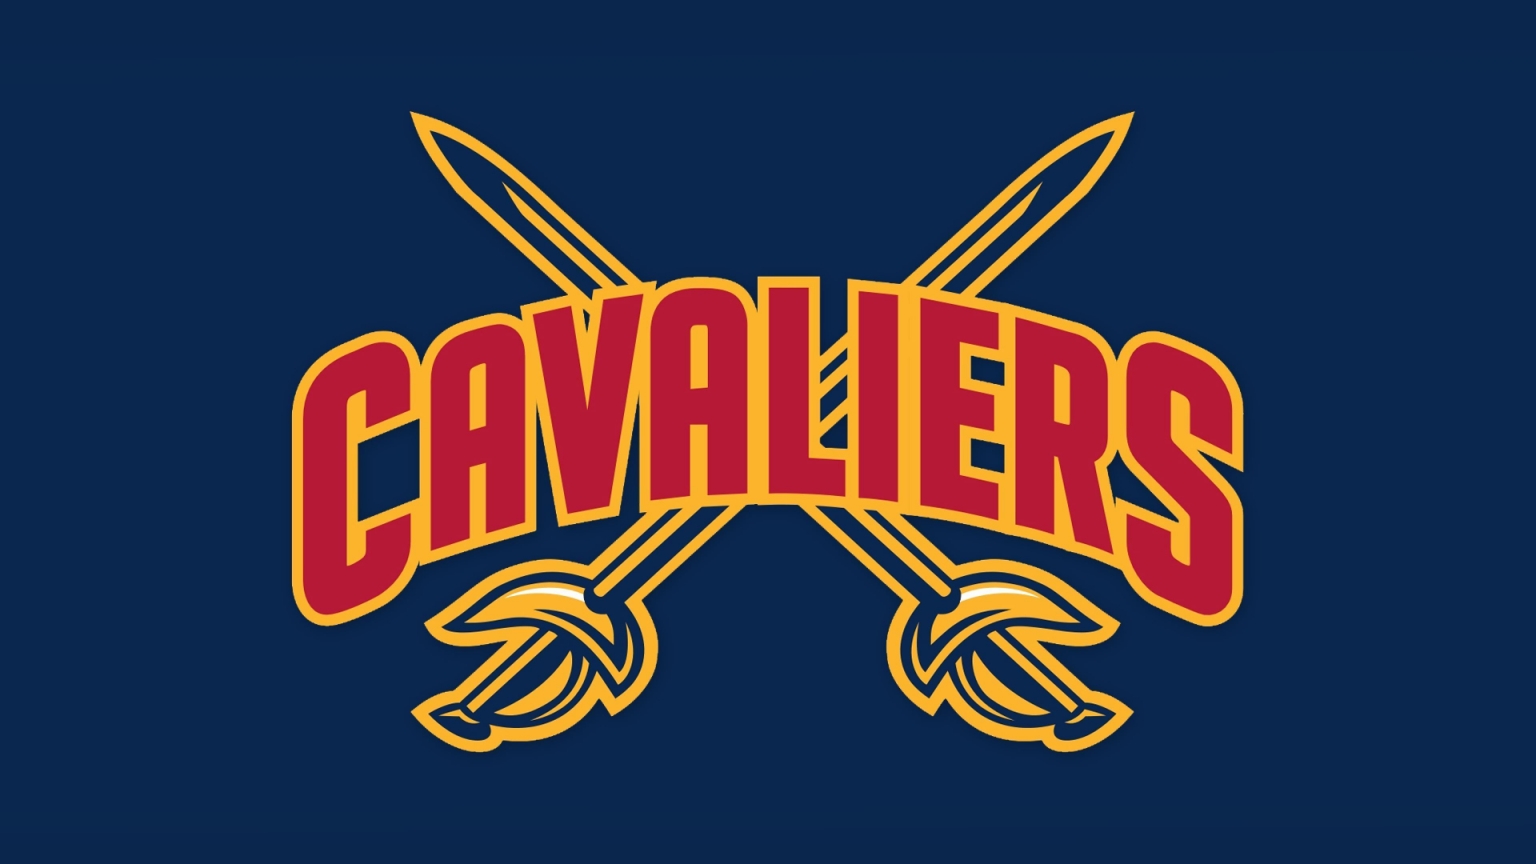 NBA Cleveland Cavaliers Logo for 1536 x 864 HDTV resolution